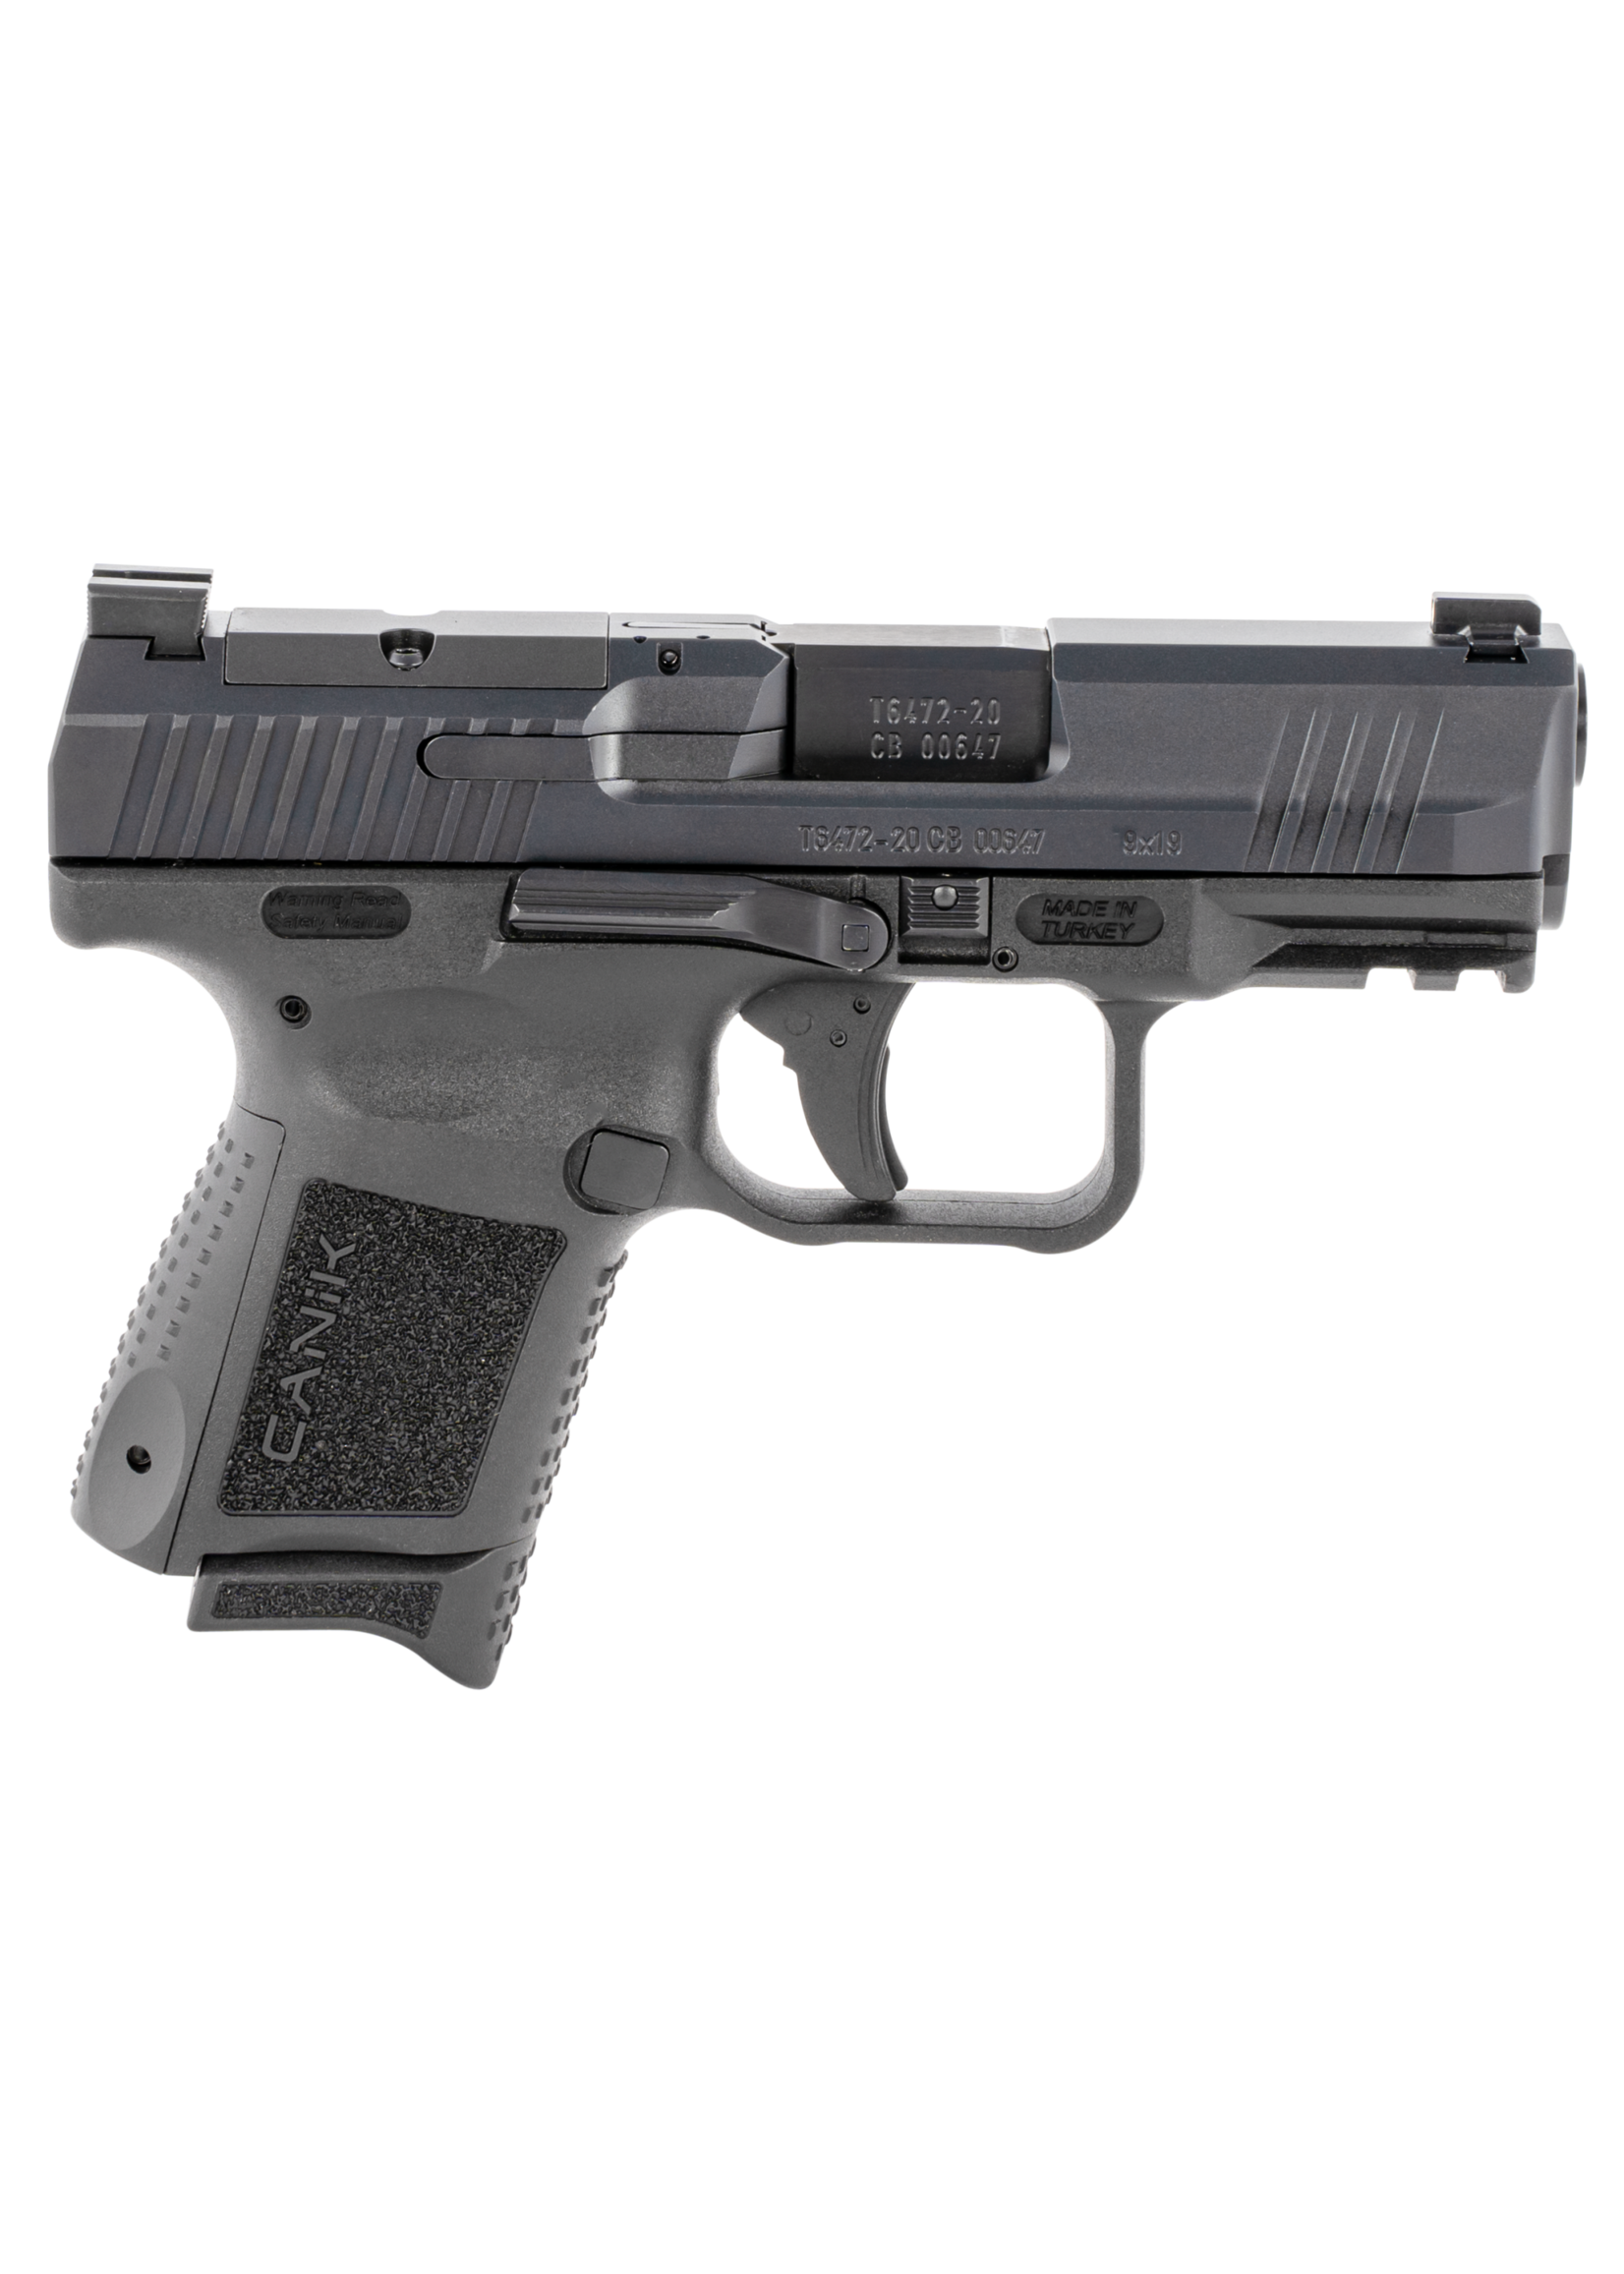 Canik Canik TP9 Elite Subcompact 9mm Luger Caliber with 3.60" Barrel, 15+1 or 12+1 Capacity, Black Finish with Picatinny Rail, Serrated Nitride Finish Steel Slide & Interchangeable Backstrap Grip